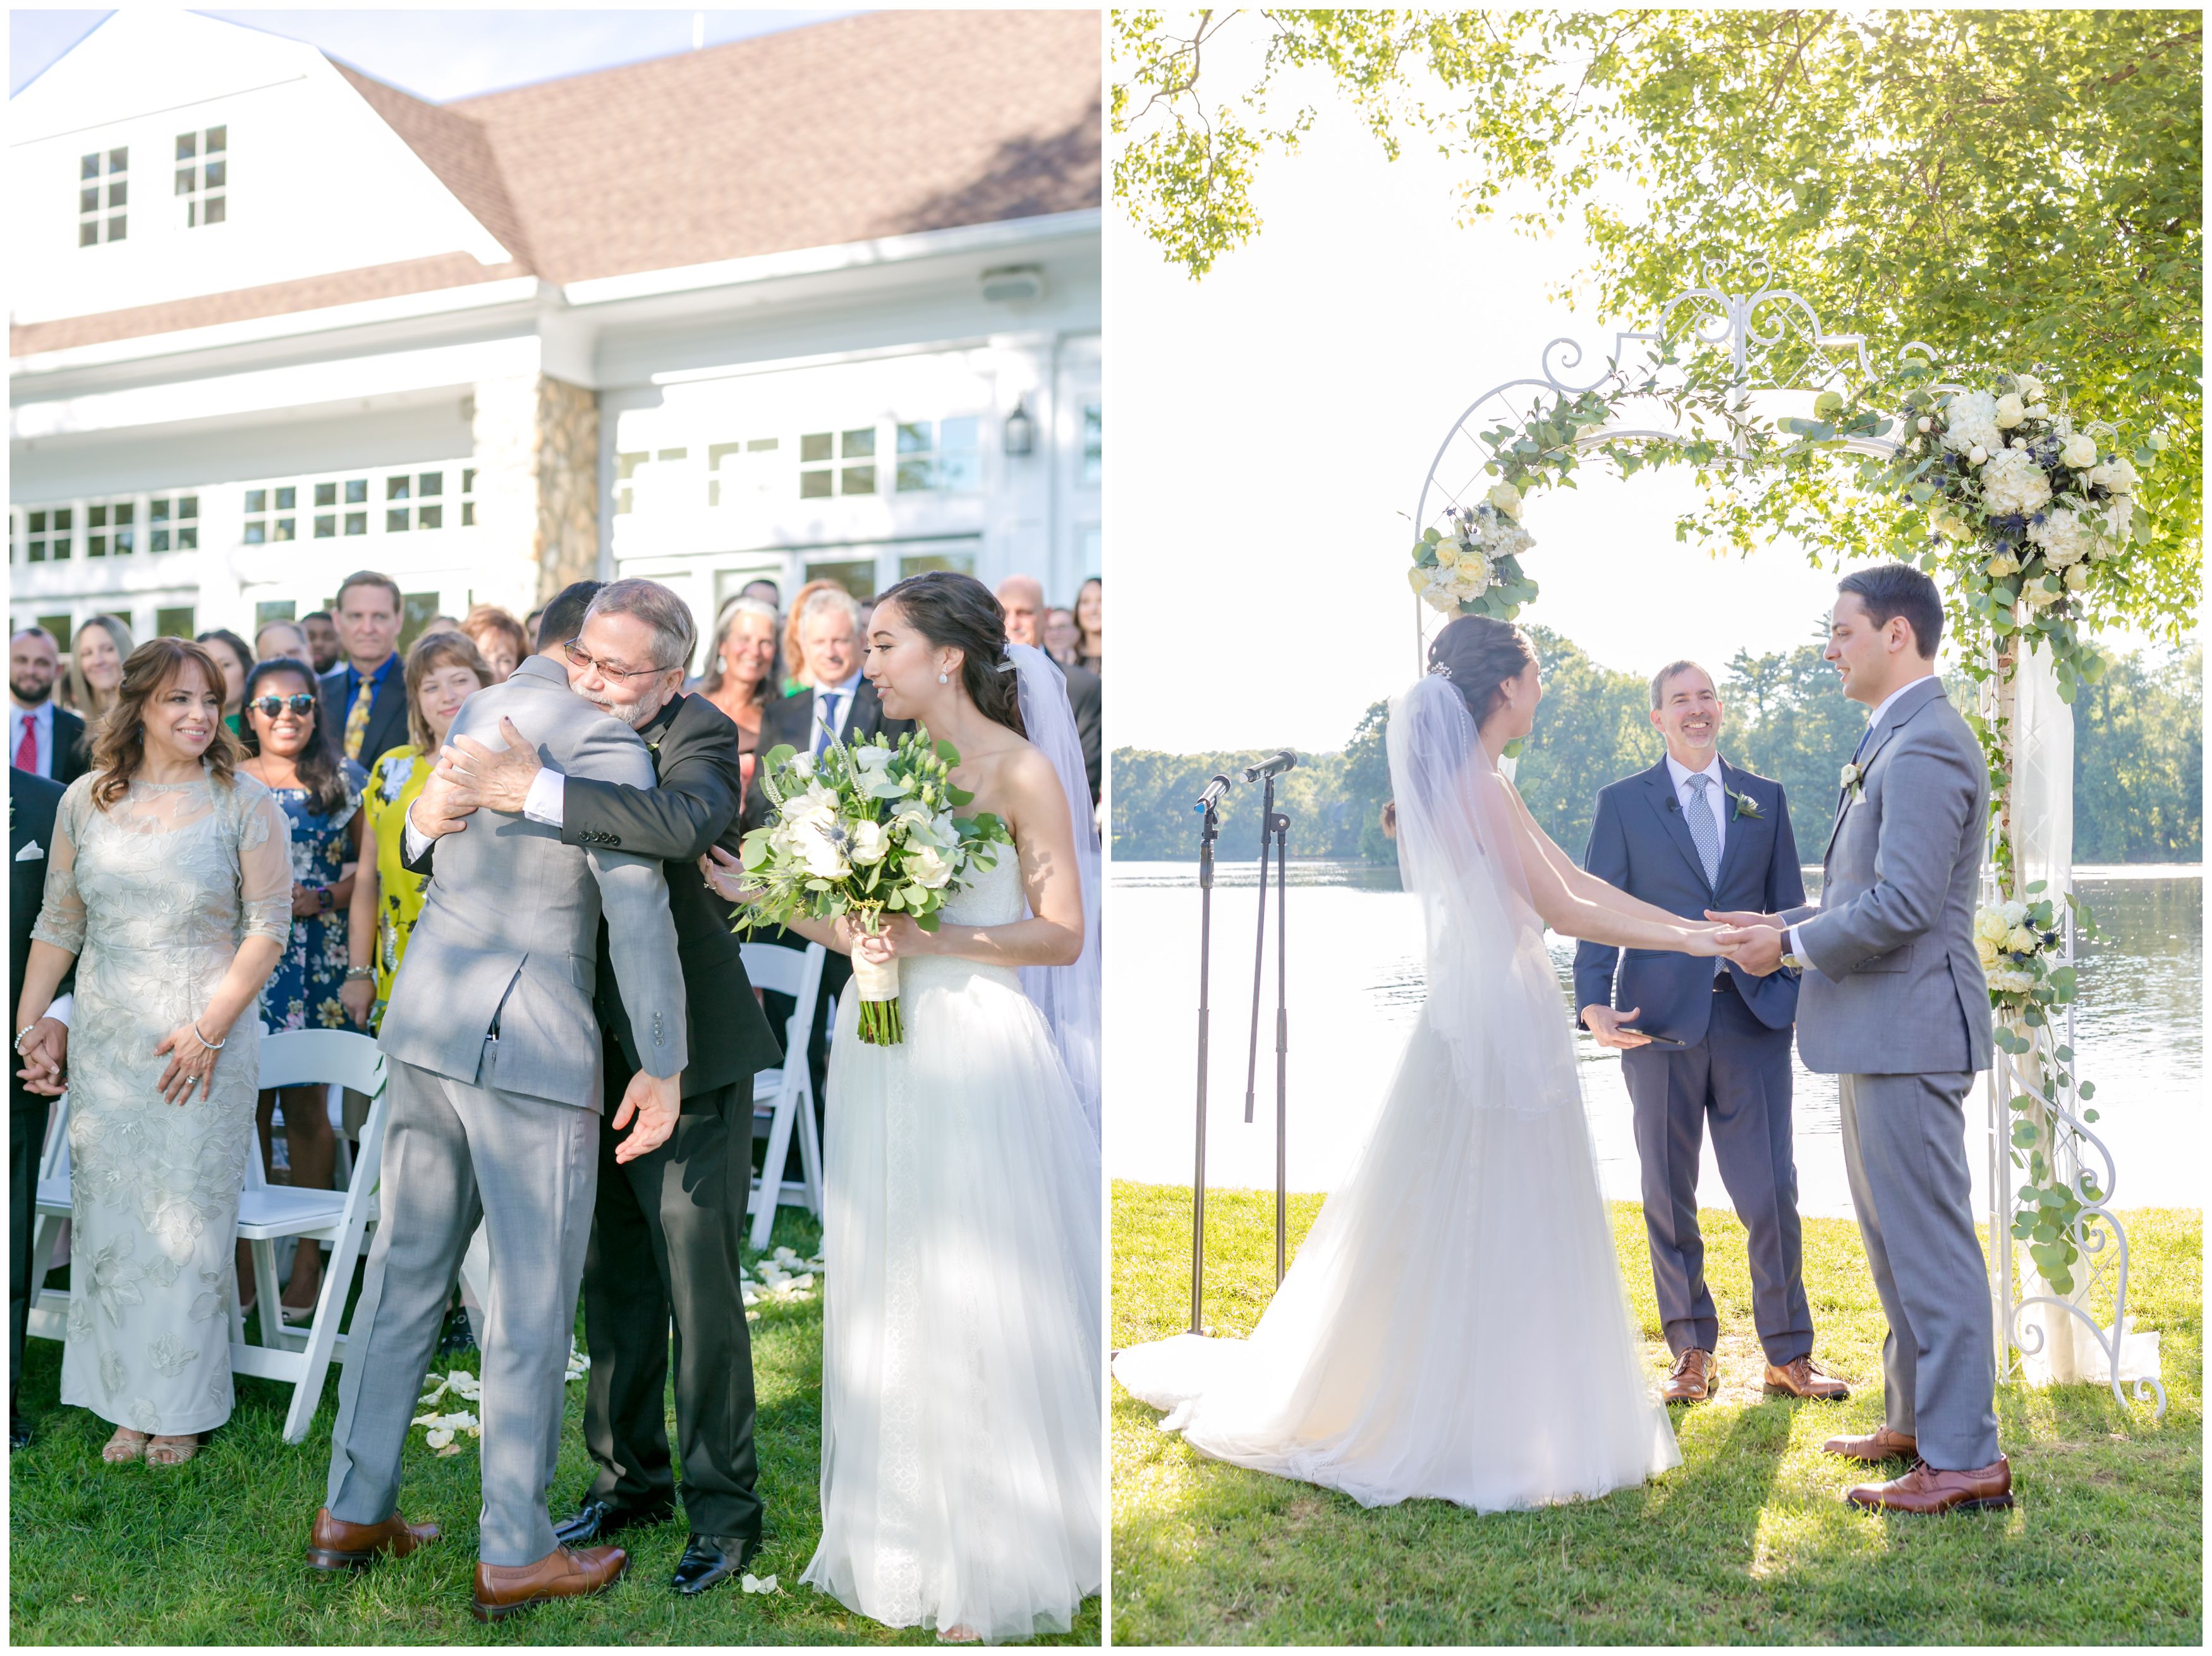 Outdoor lakeside ceremony giving away the bride